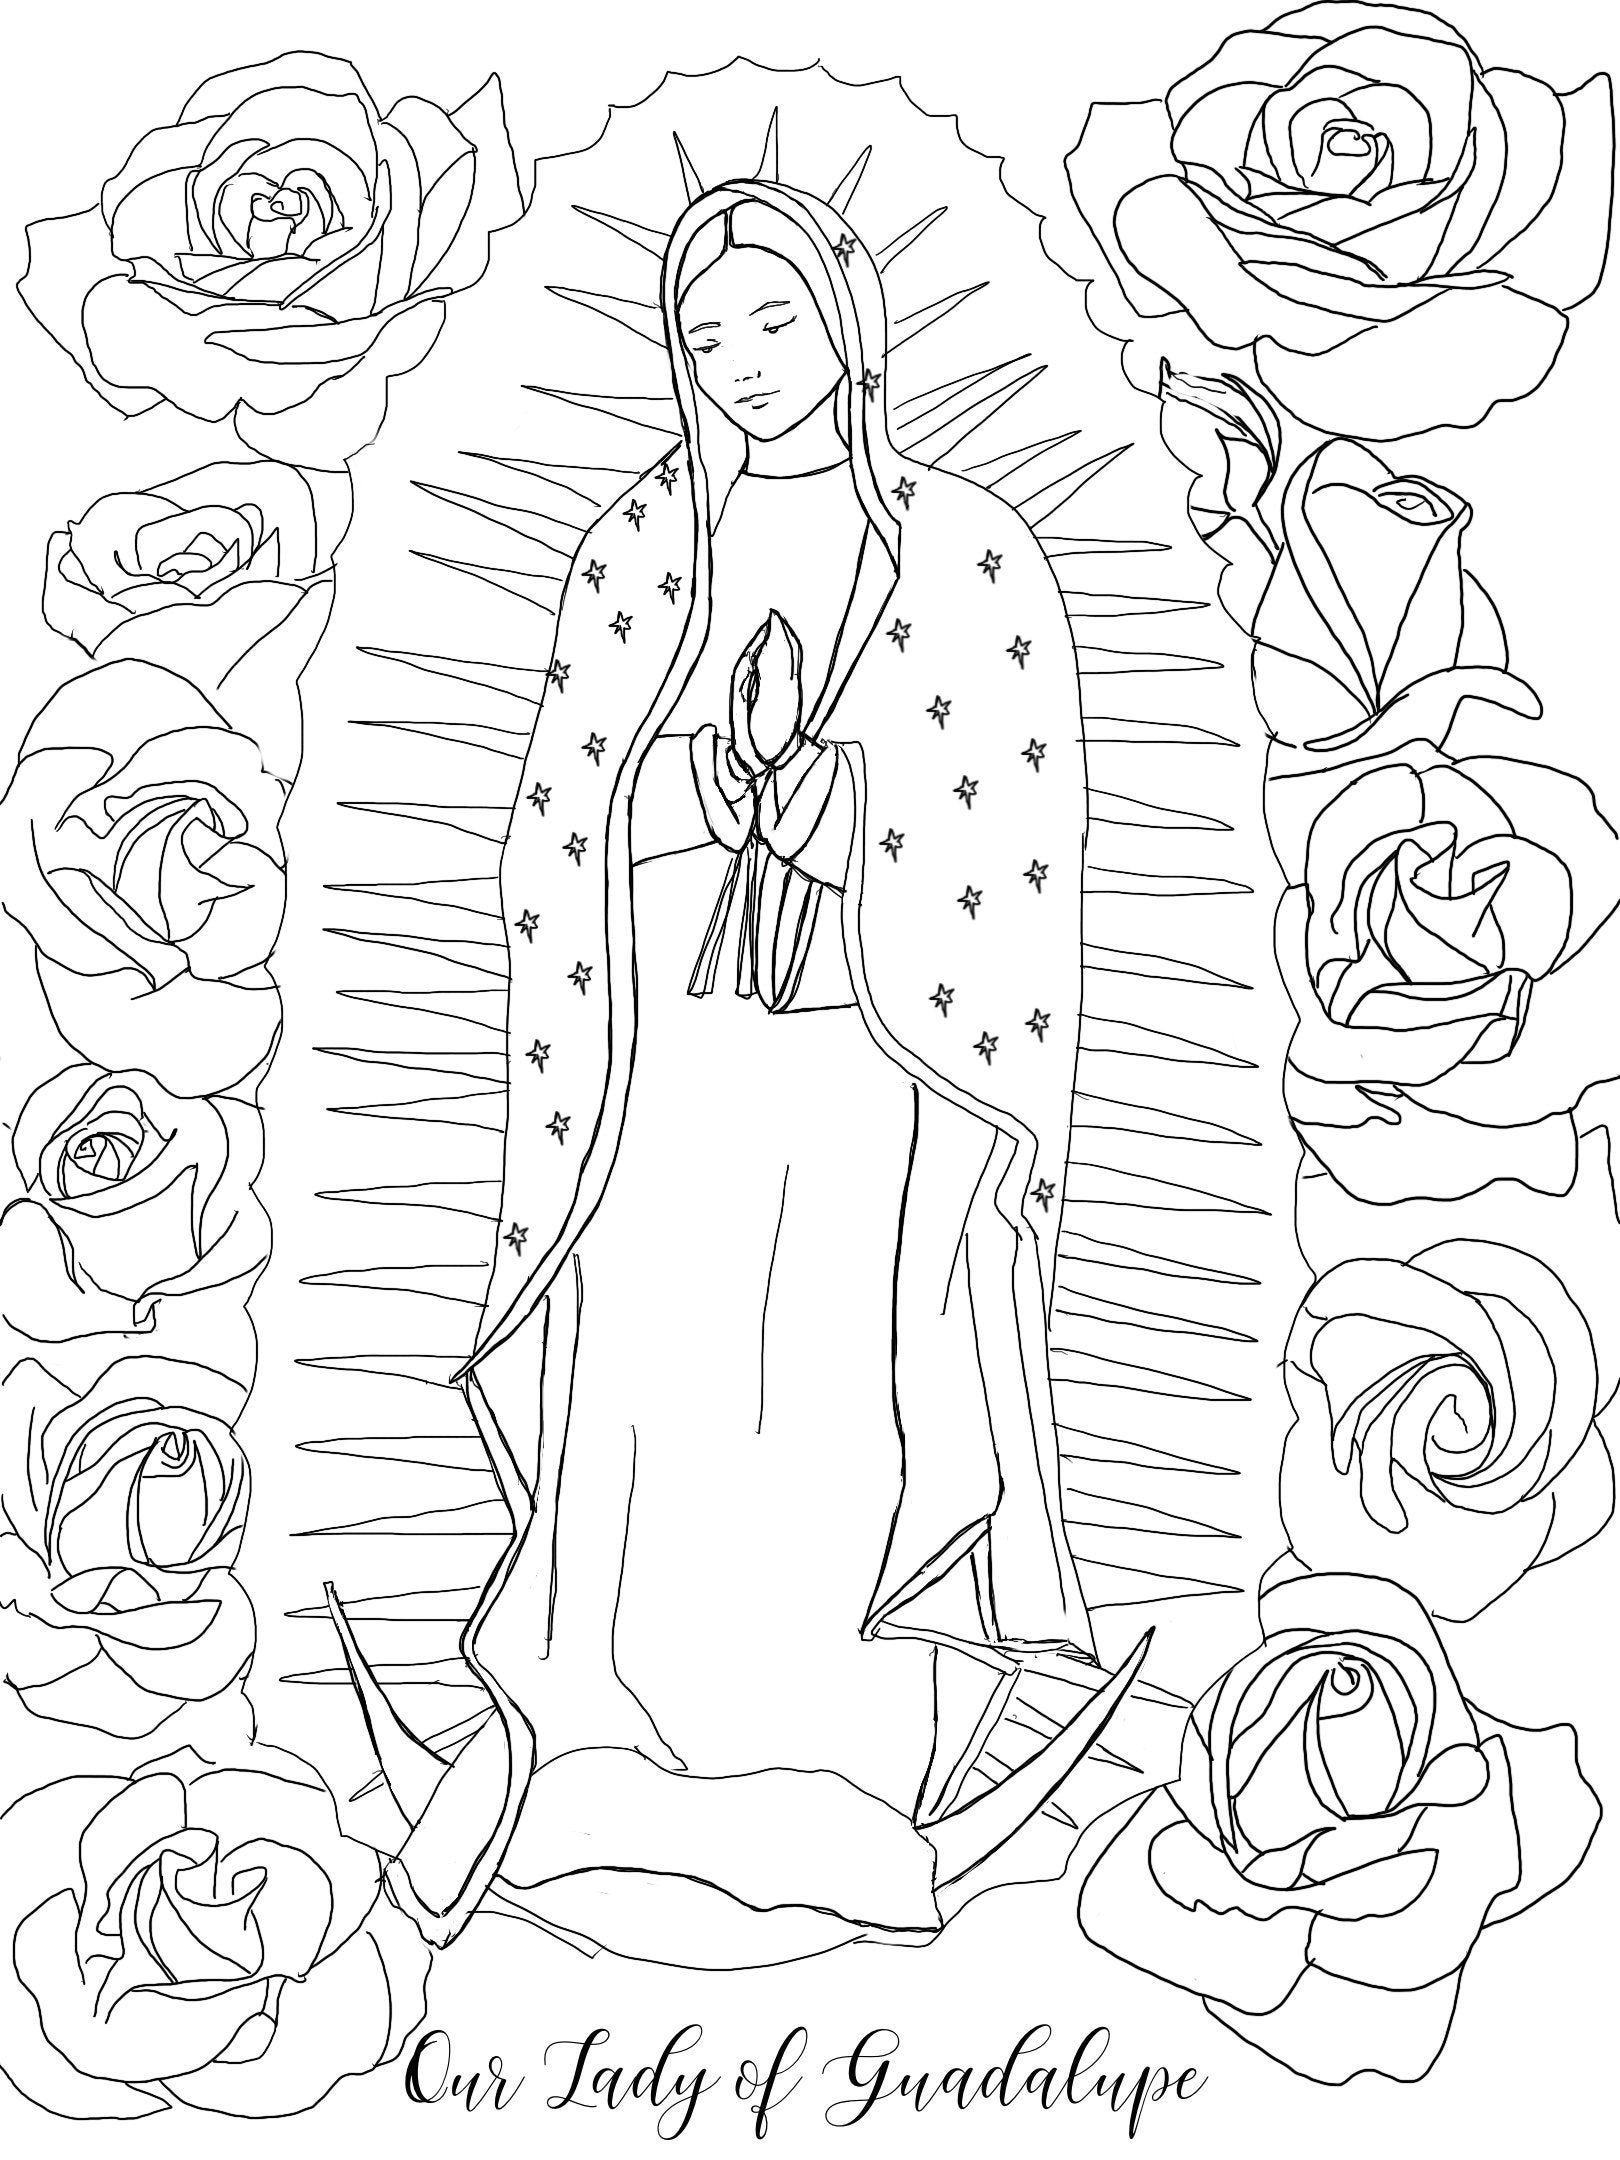 Guadalupe coloring